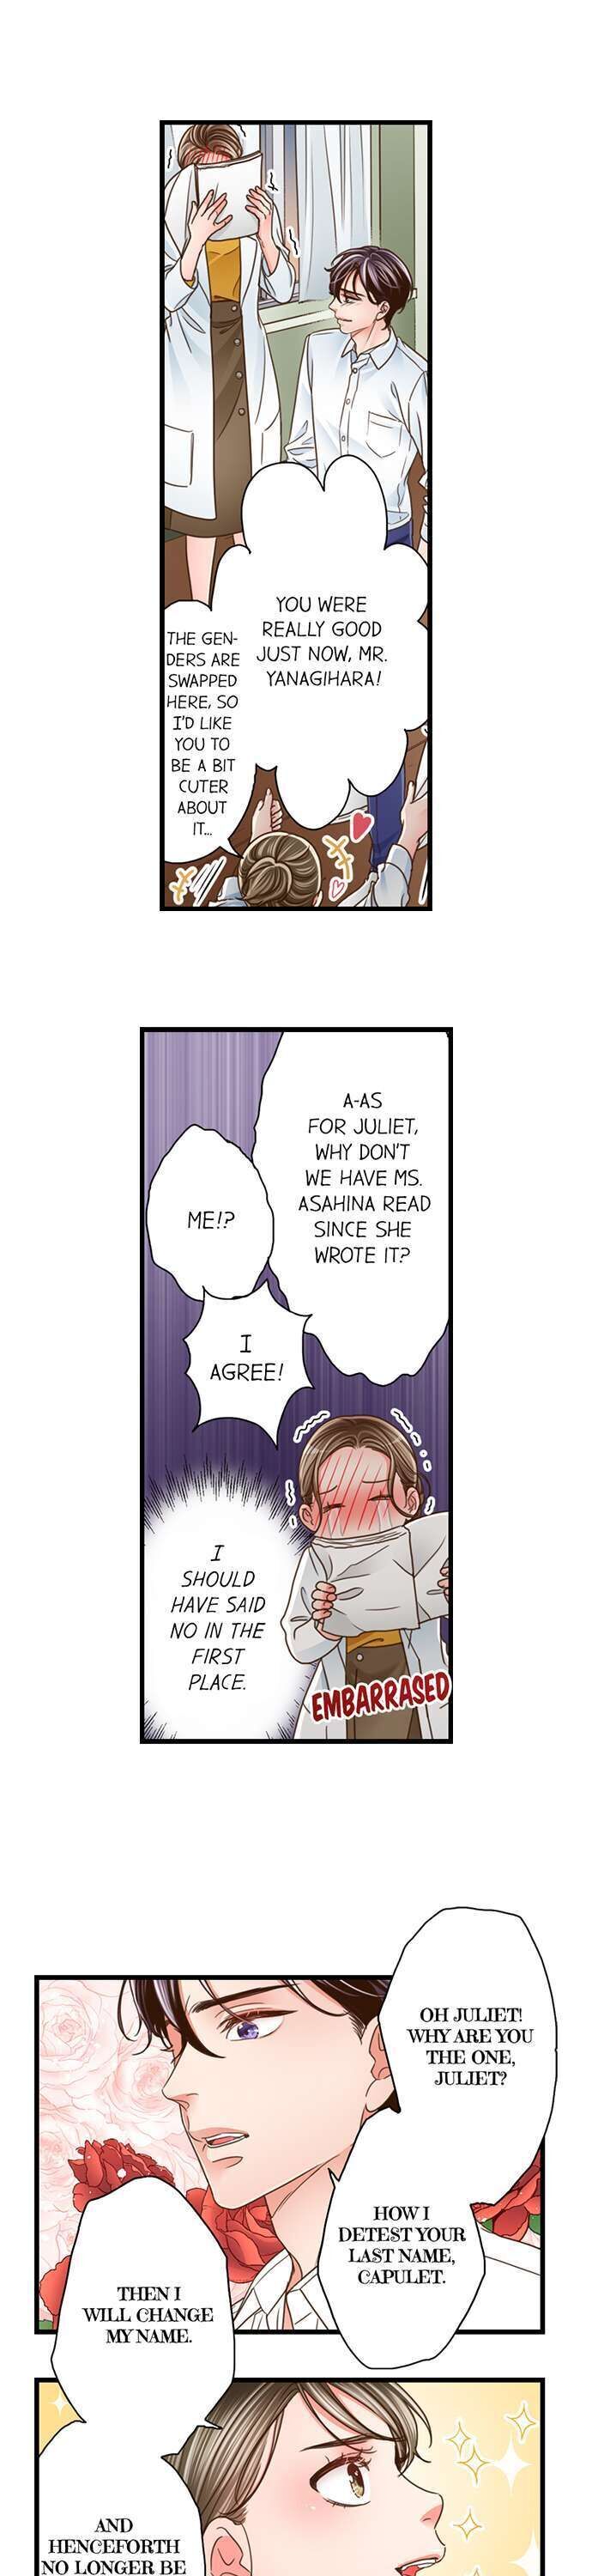 Yanagihara Is a Sex Addict. - Chapter 127 Page 8